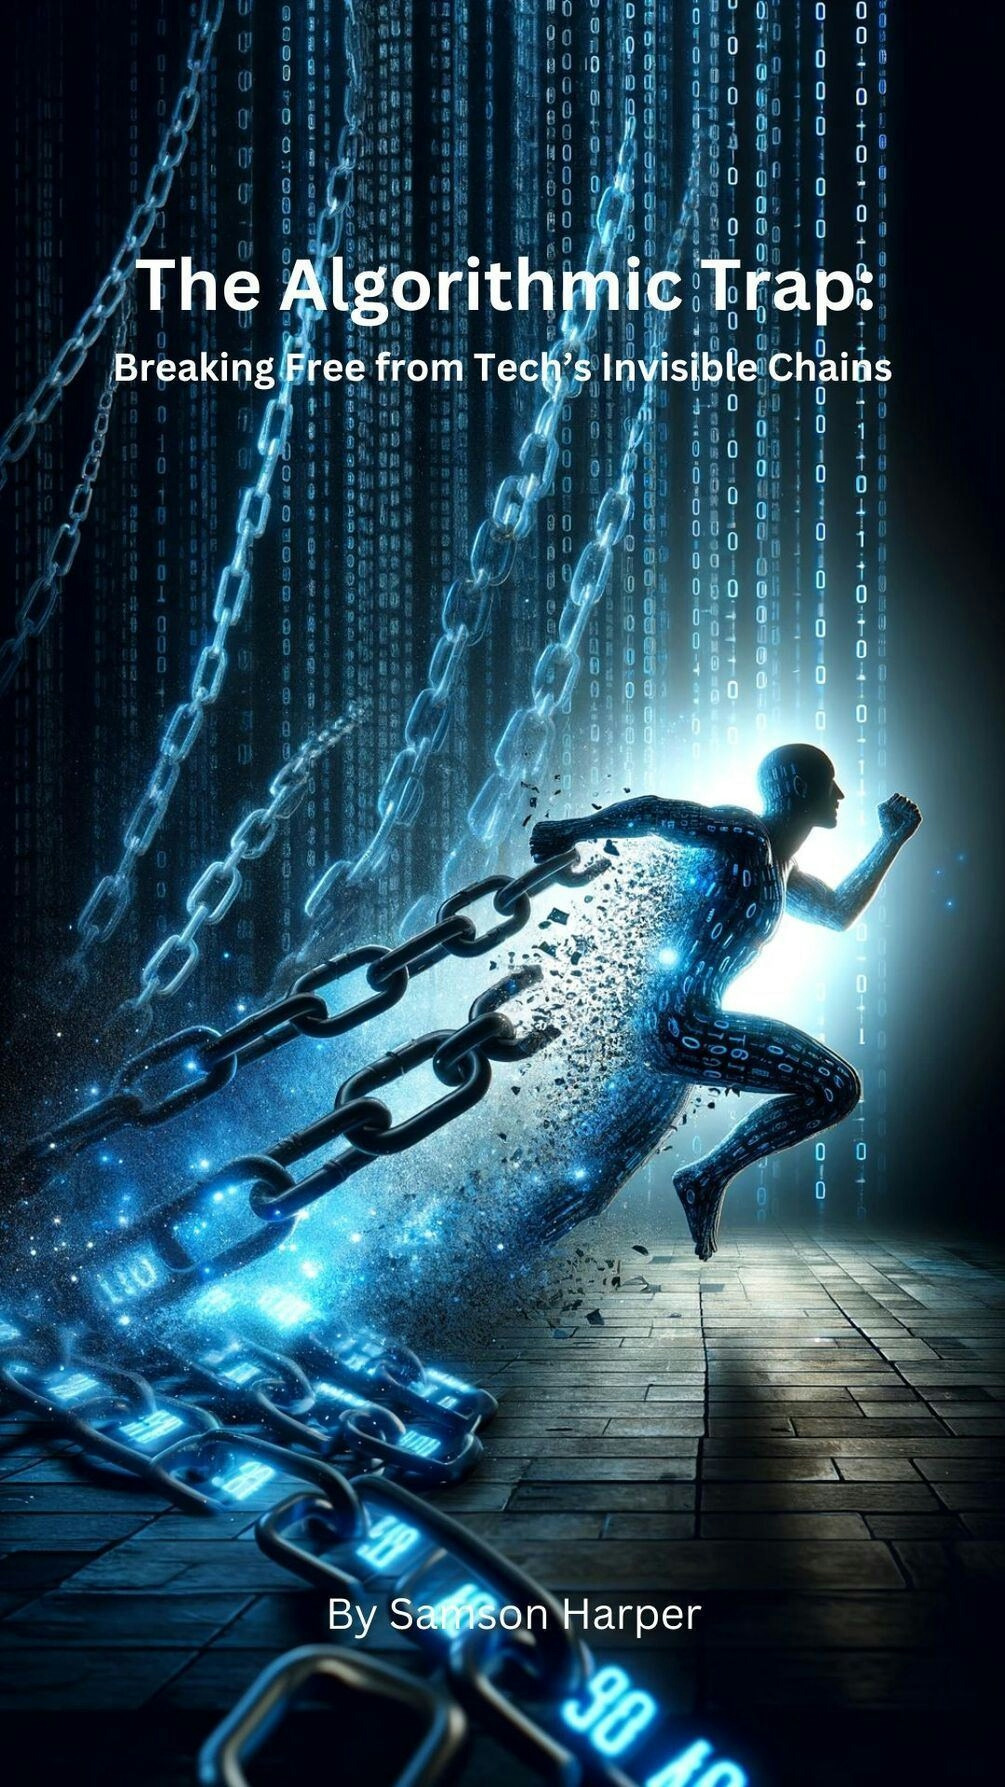 The Algorithmic Trap: Break Free from Tech's Invisible Chains